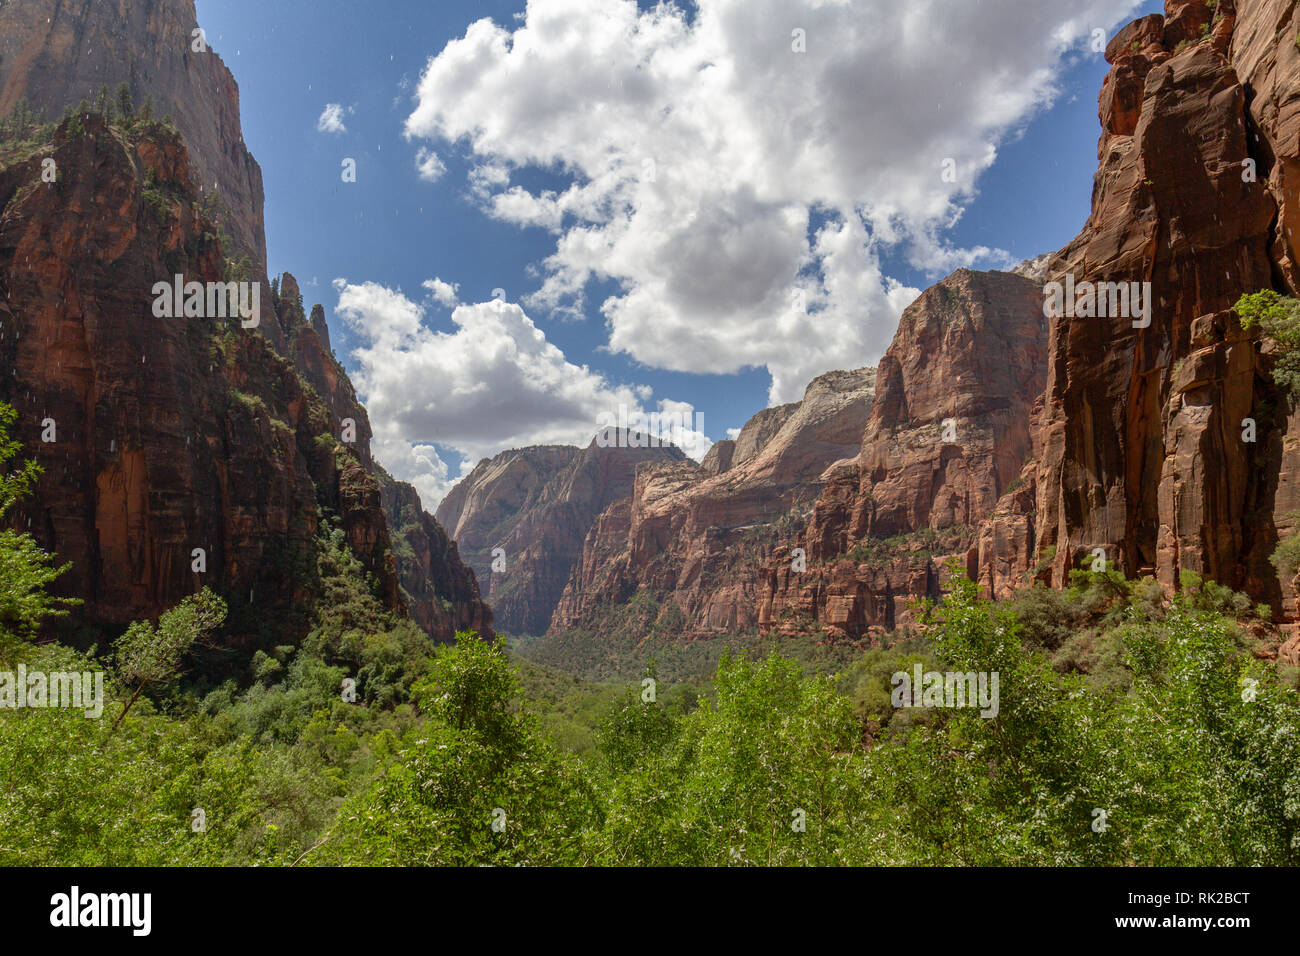 View from underneath Weeping Rock (with water dropping-see notes), Zion National Park, Springdale, Utah, United States. Stock Photo